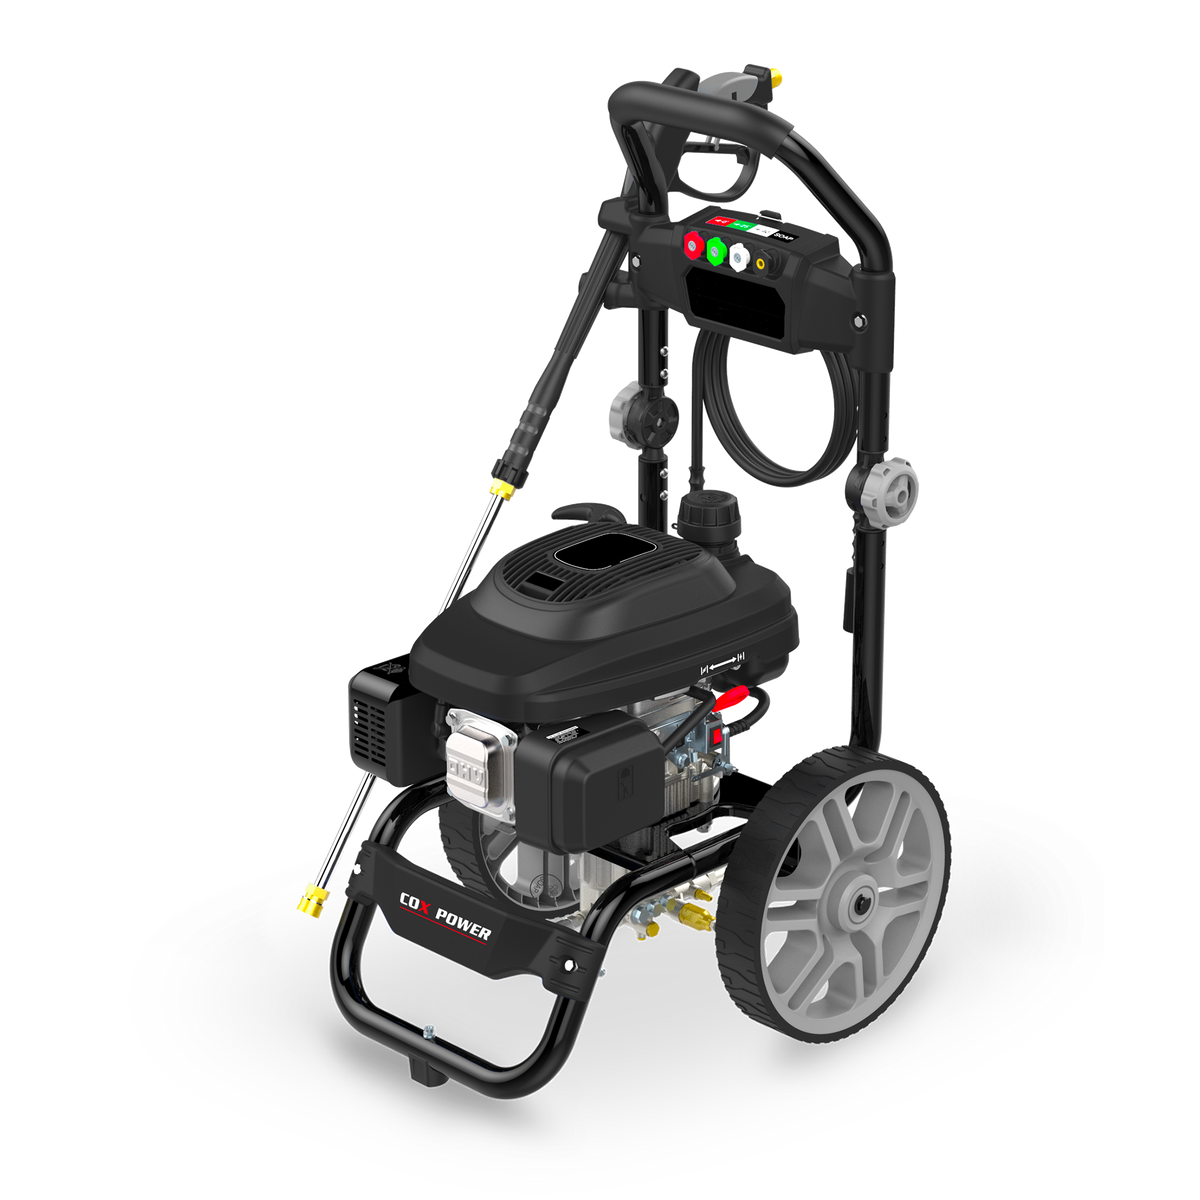 COX Power product image of a high pressure series pressure washer 2500psi